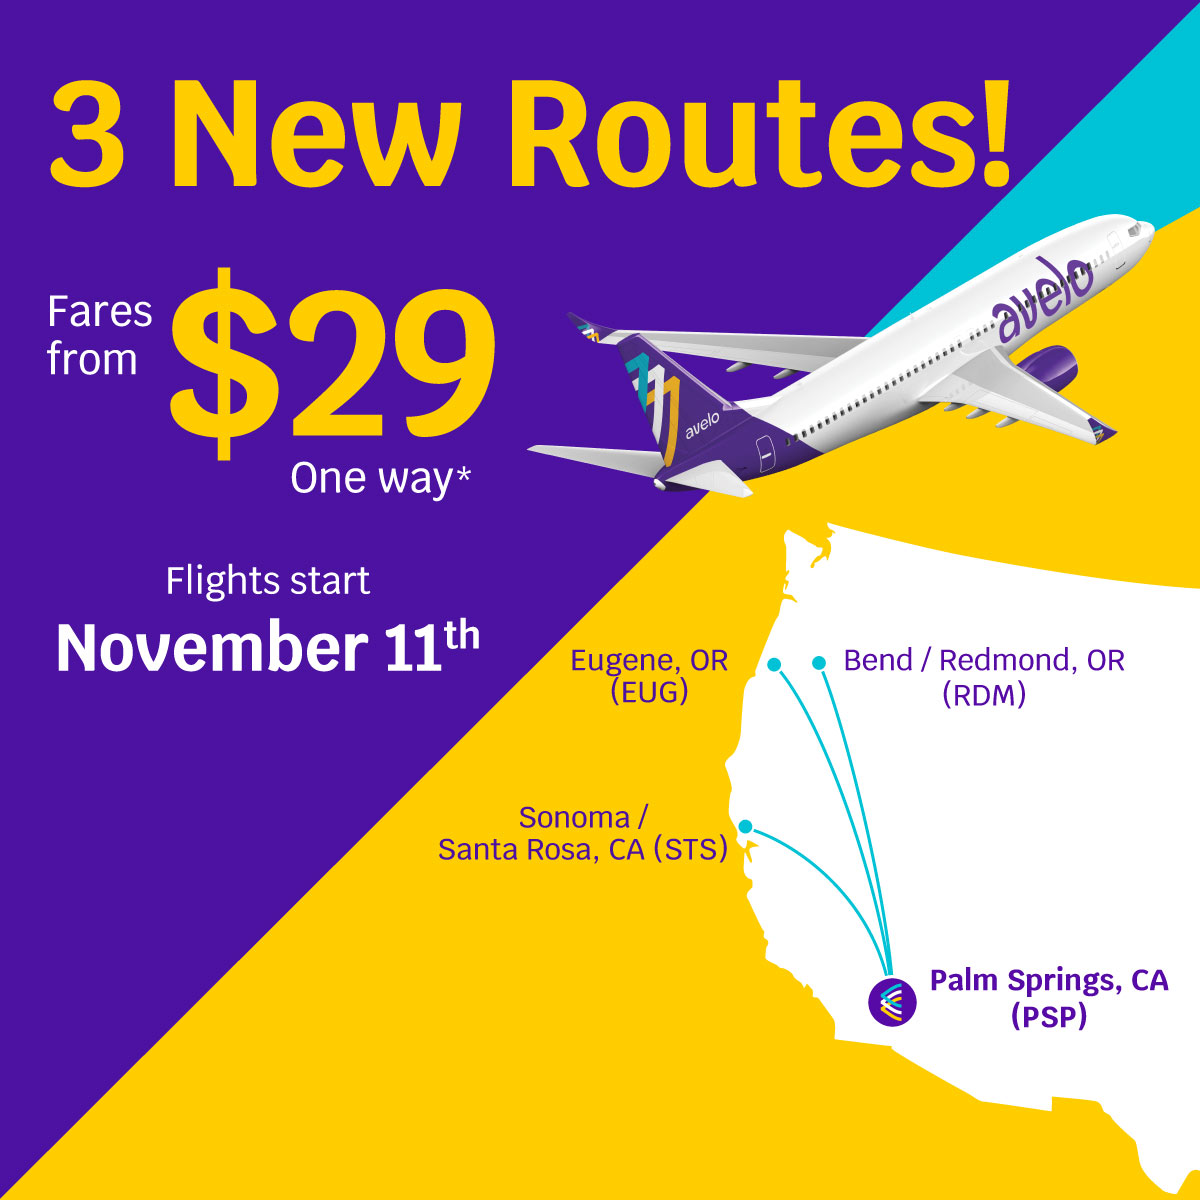 ‼New Airline & New Routes‼ We're excited to announce that @AveloAir is coming to PSP with new nonstop service to Santa Rosa, CA, Eugene, OR, and Bend/Redmond, OR with introductory fares starting at $29 one way! Book today at AveloAir.com! Flights start 11/11/22